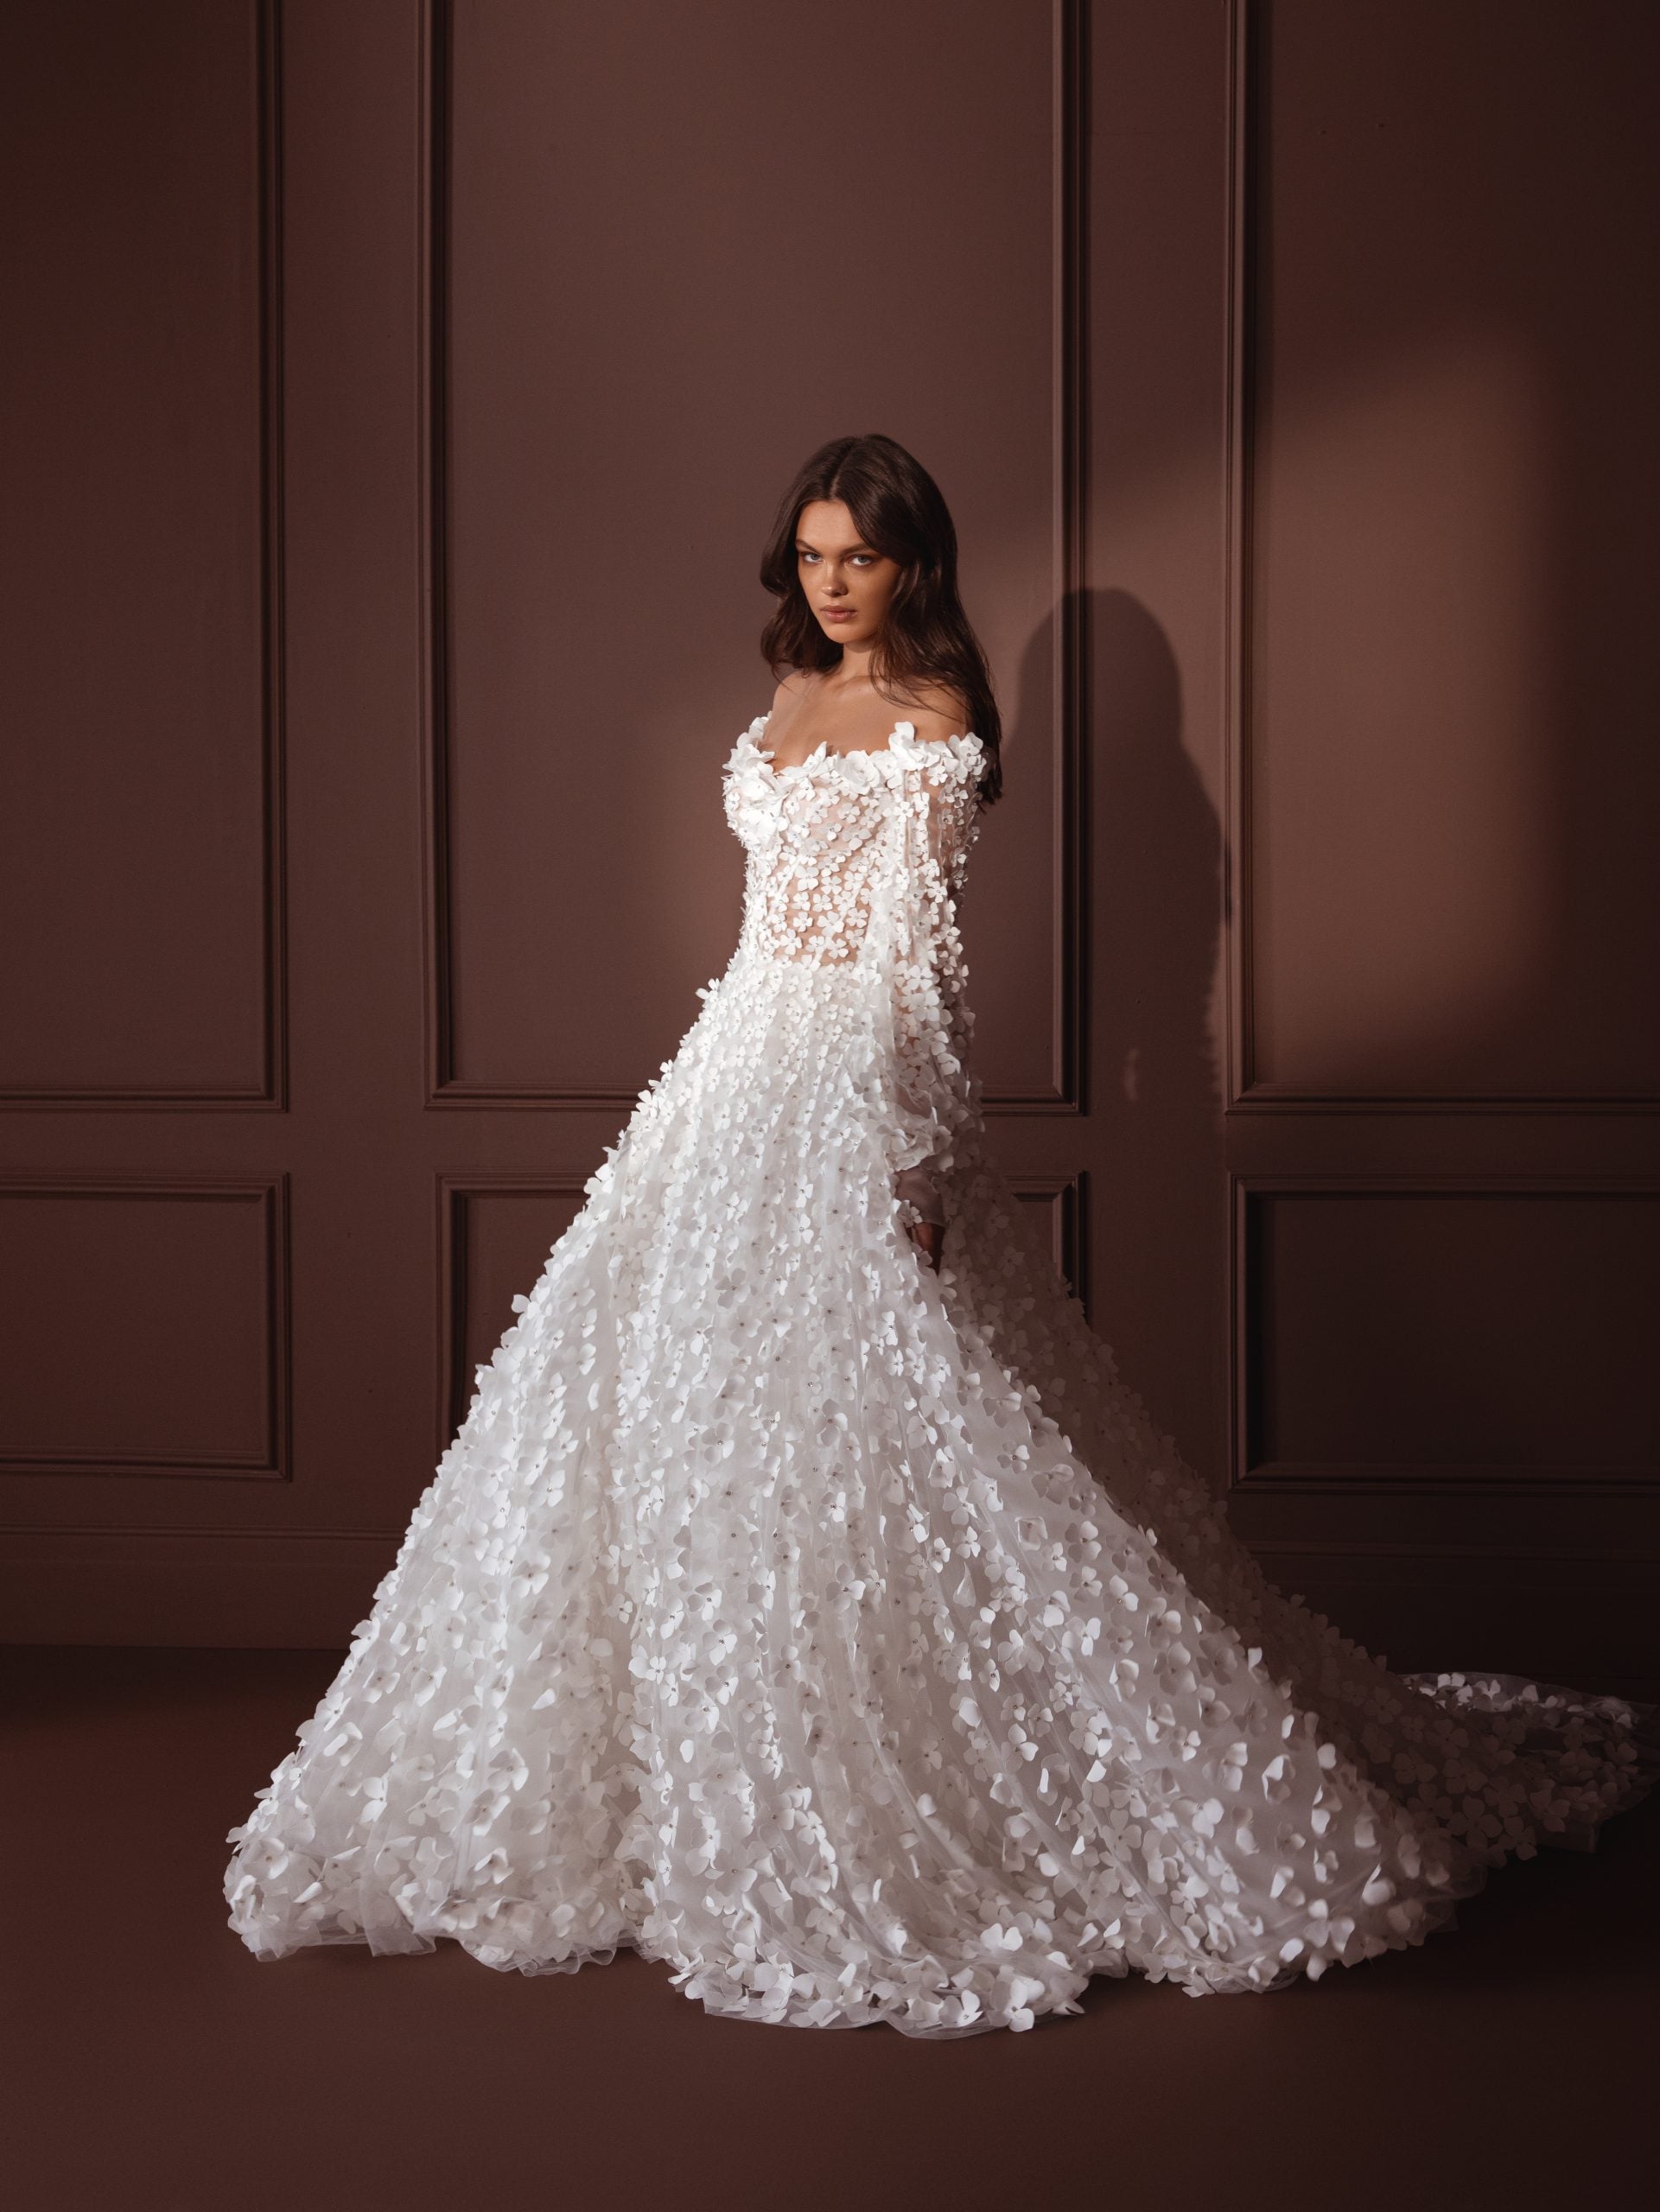 Laser Cut Flower A-Line Gown by Pnina Tornai - Image 1